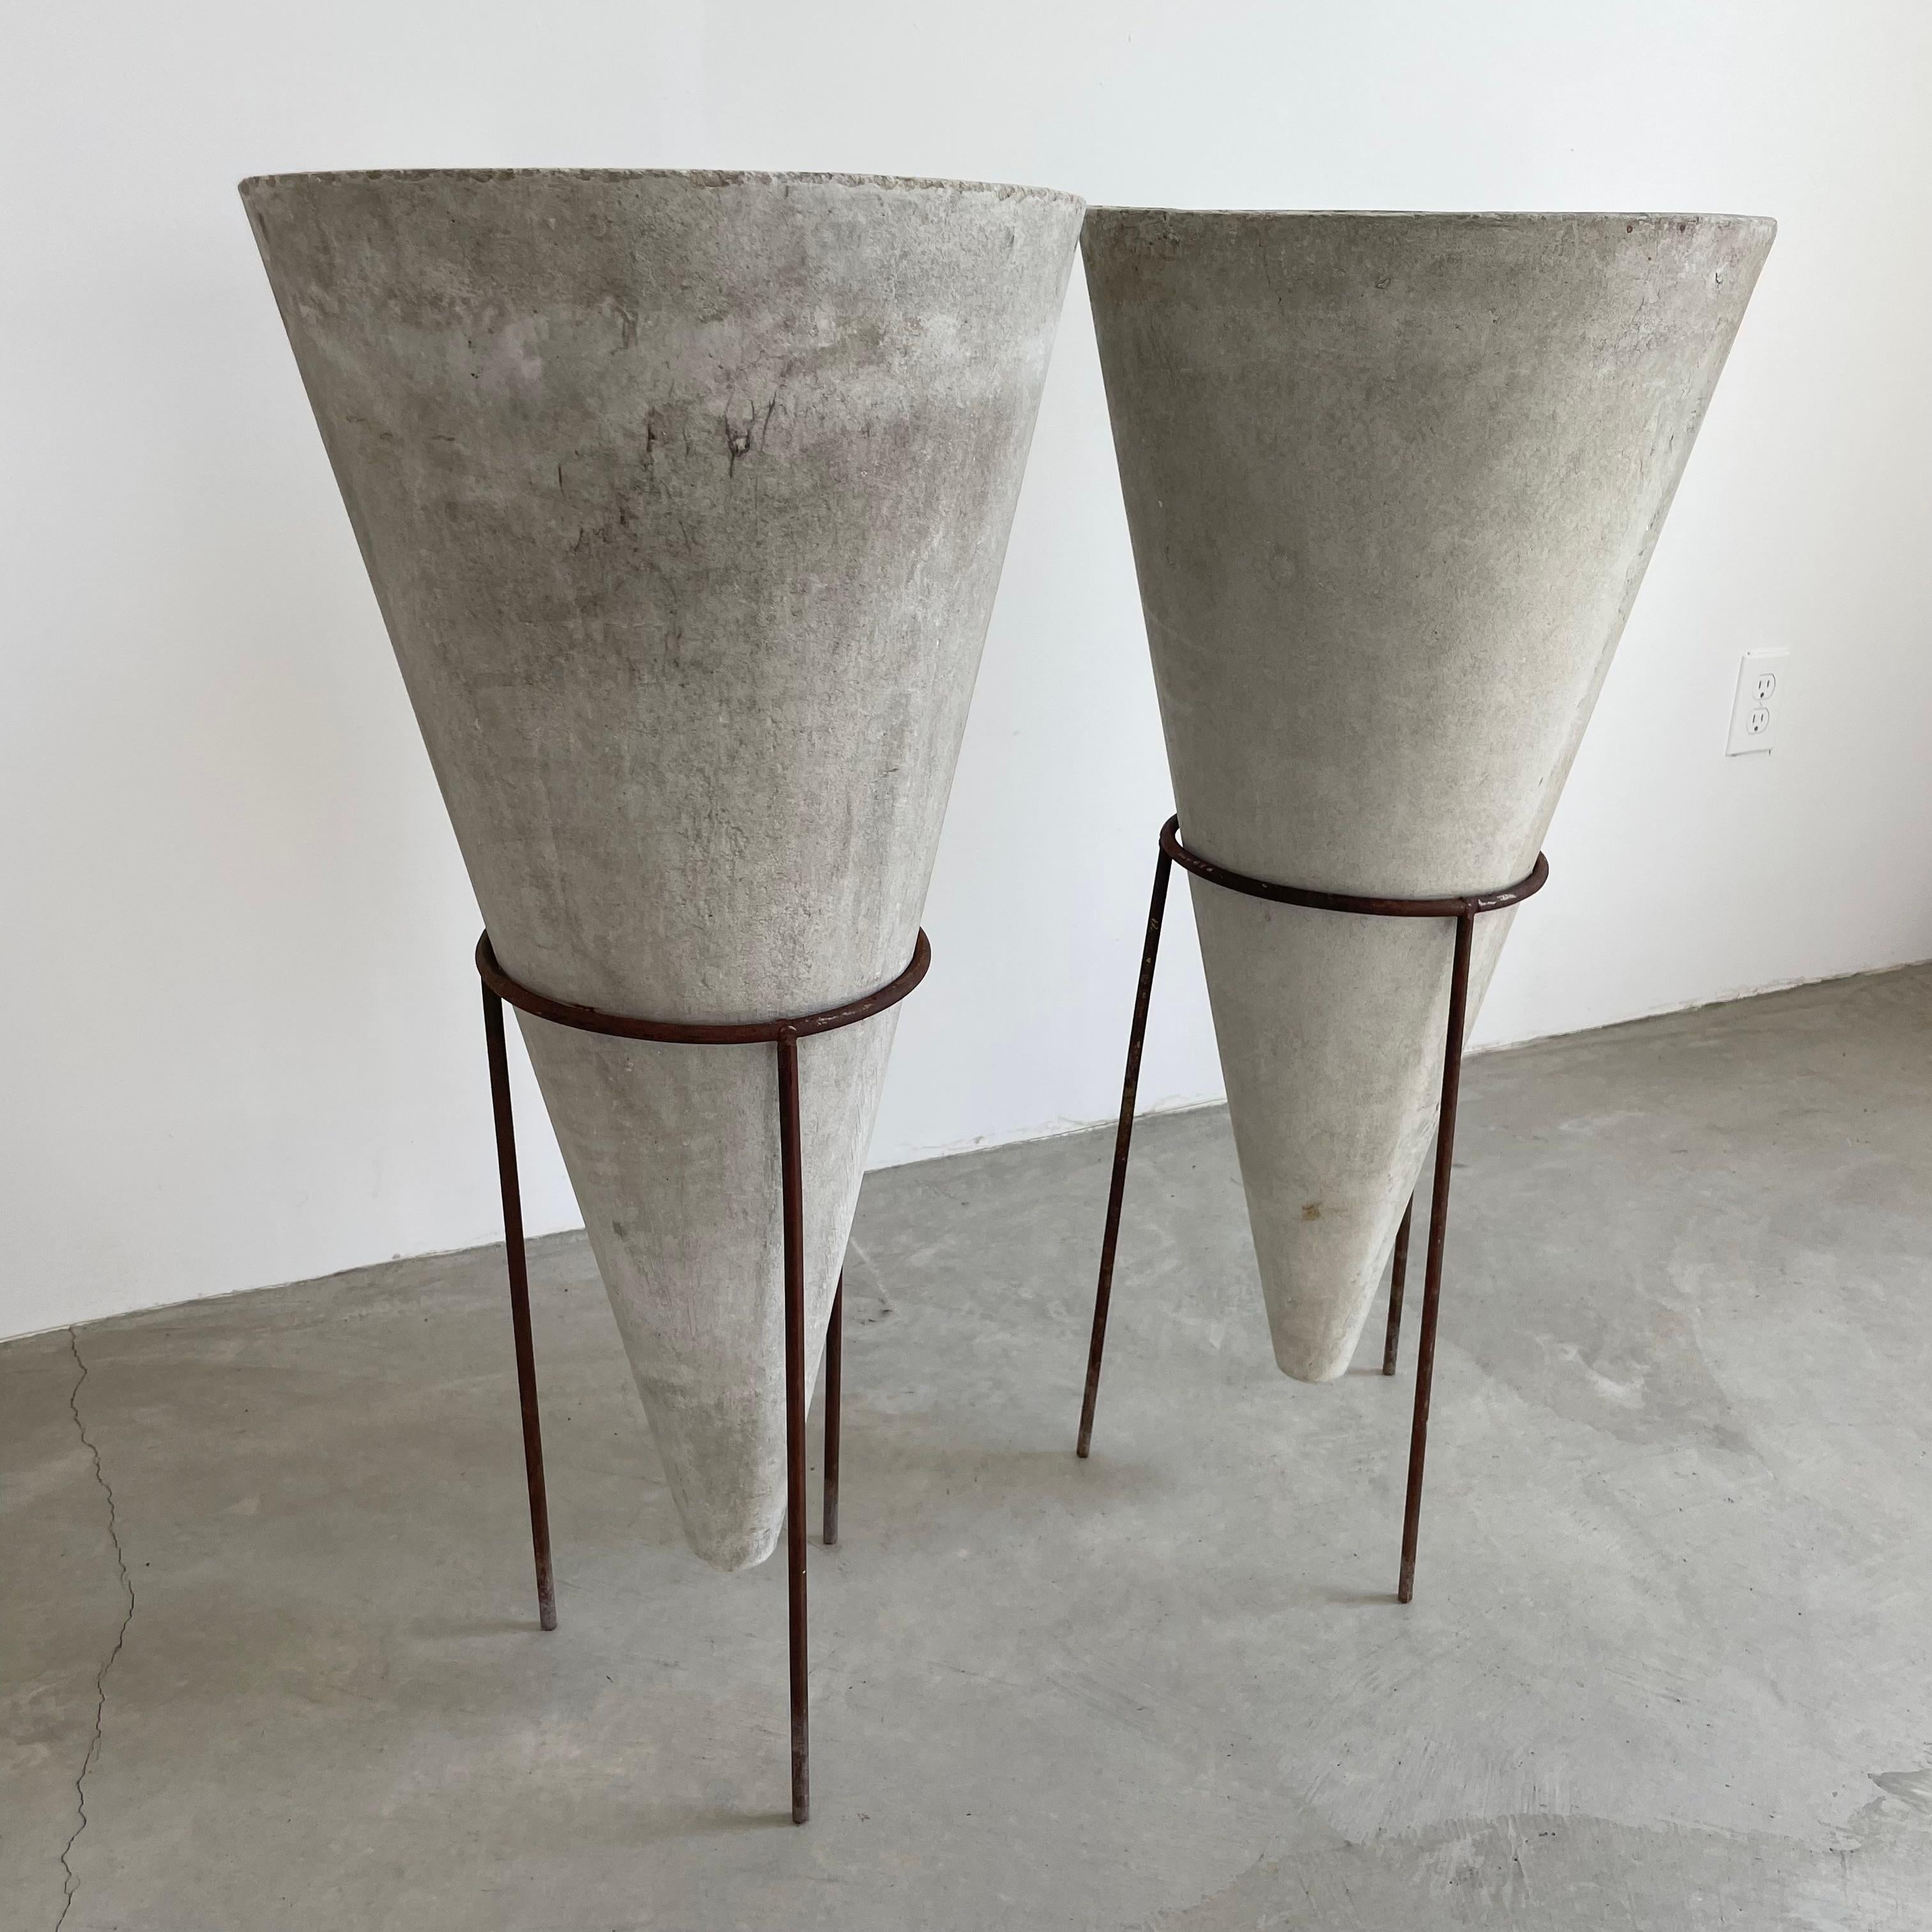 Swiss Willy Guhl Concrete Cone Planter on Iron Stand, 1960s